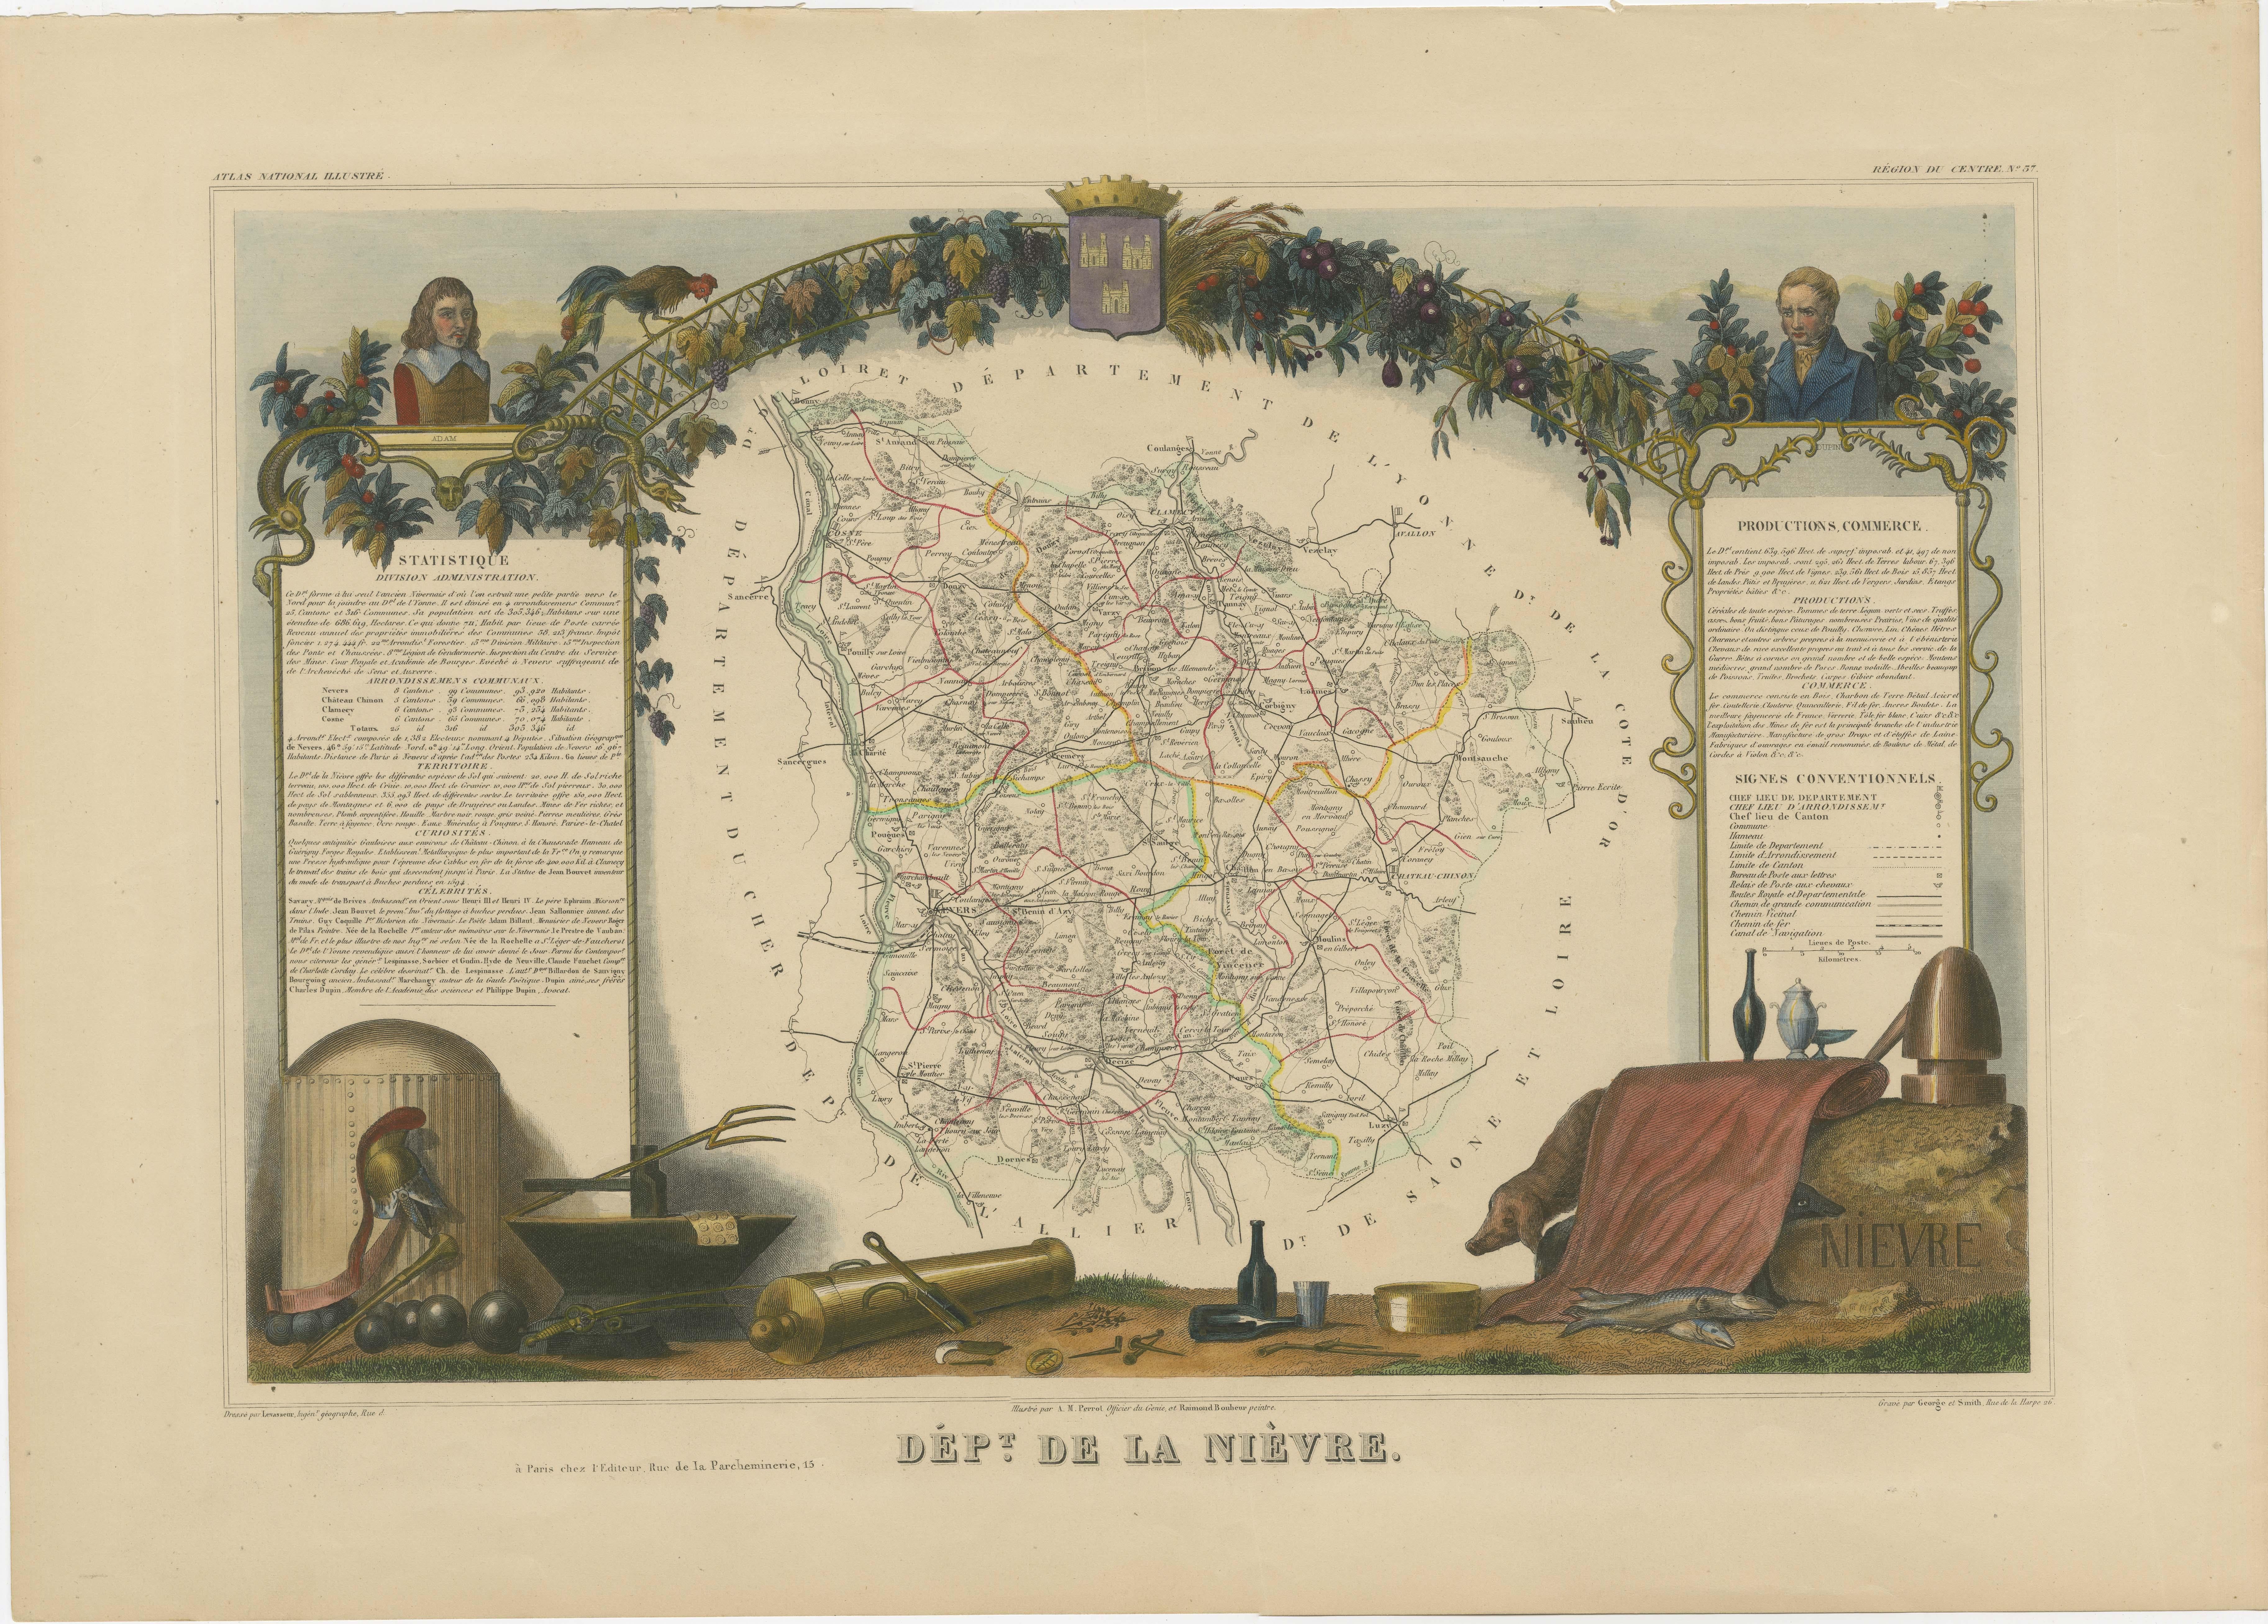 Antique map titled 'Dept. de la Nièvre'. Map of the French department of Nievre, France. Part of the prestiegous Burgundy or Bourgogne wine region this area is known for its production of Pouilly Fumé, a white wine. The word “fumé” is French for